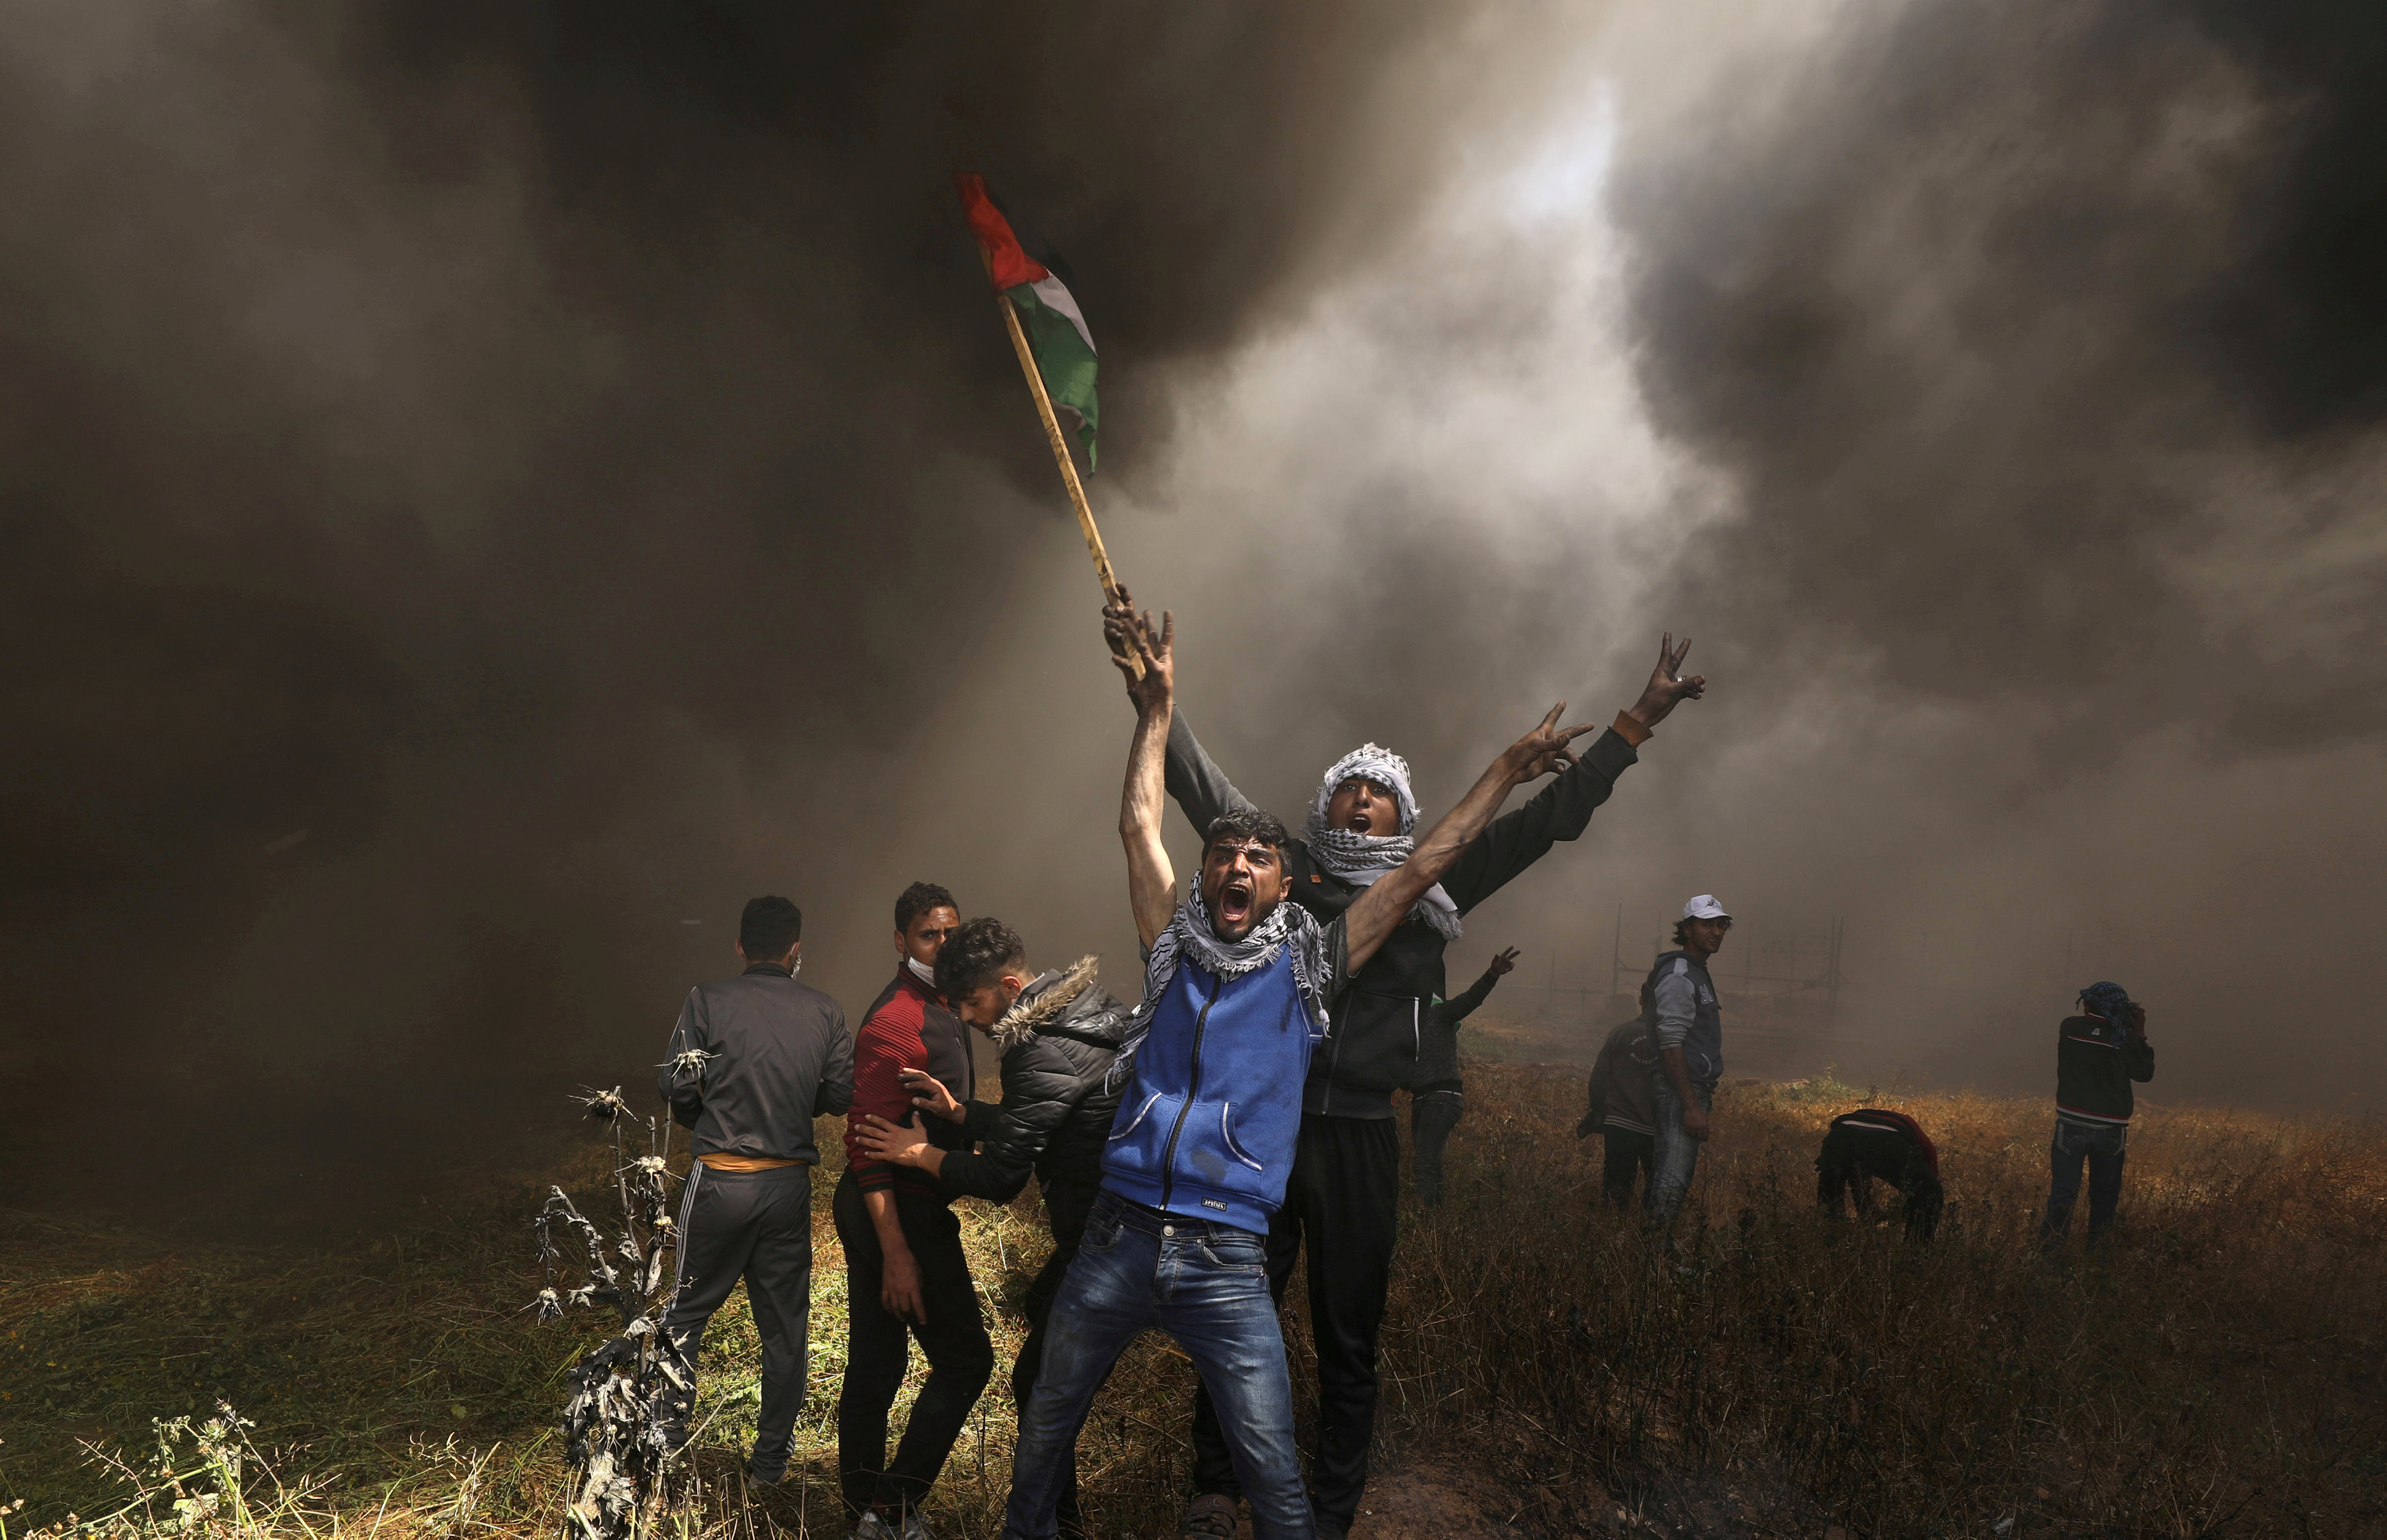 A picture and its story: Smoke clears and photographer captures momentÊof protest